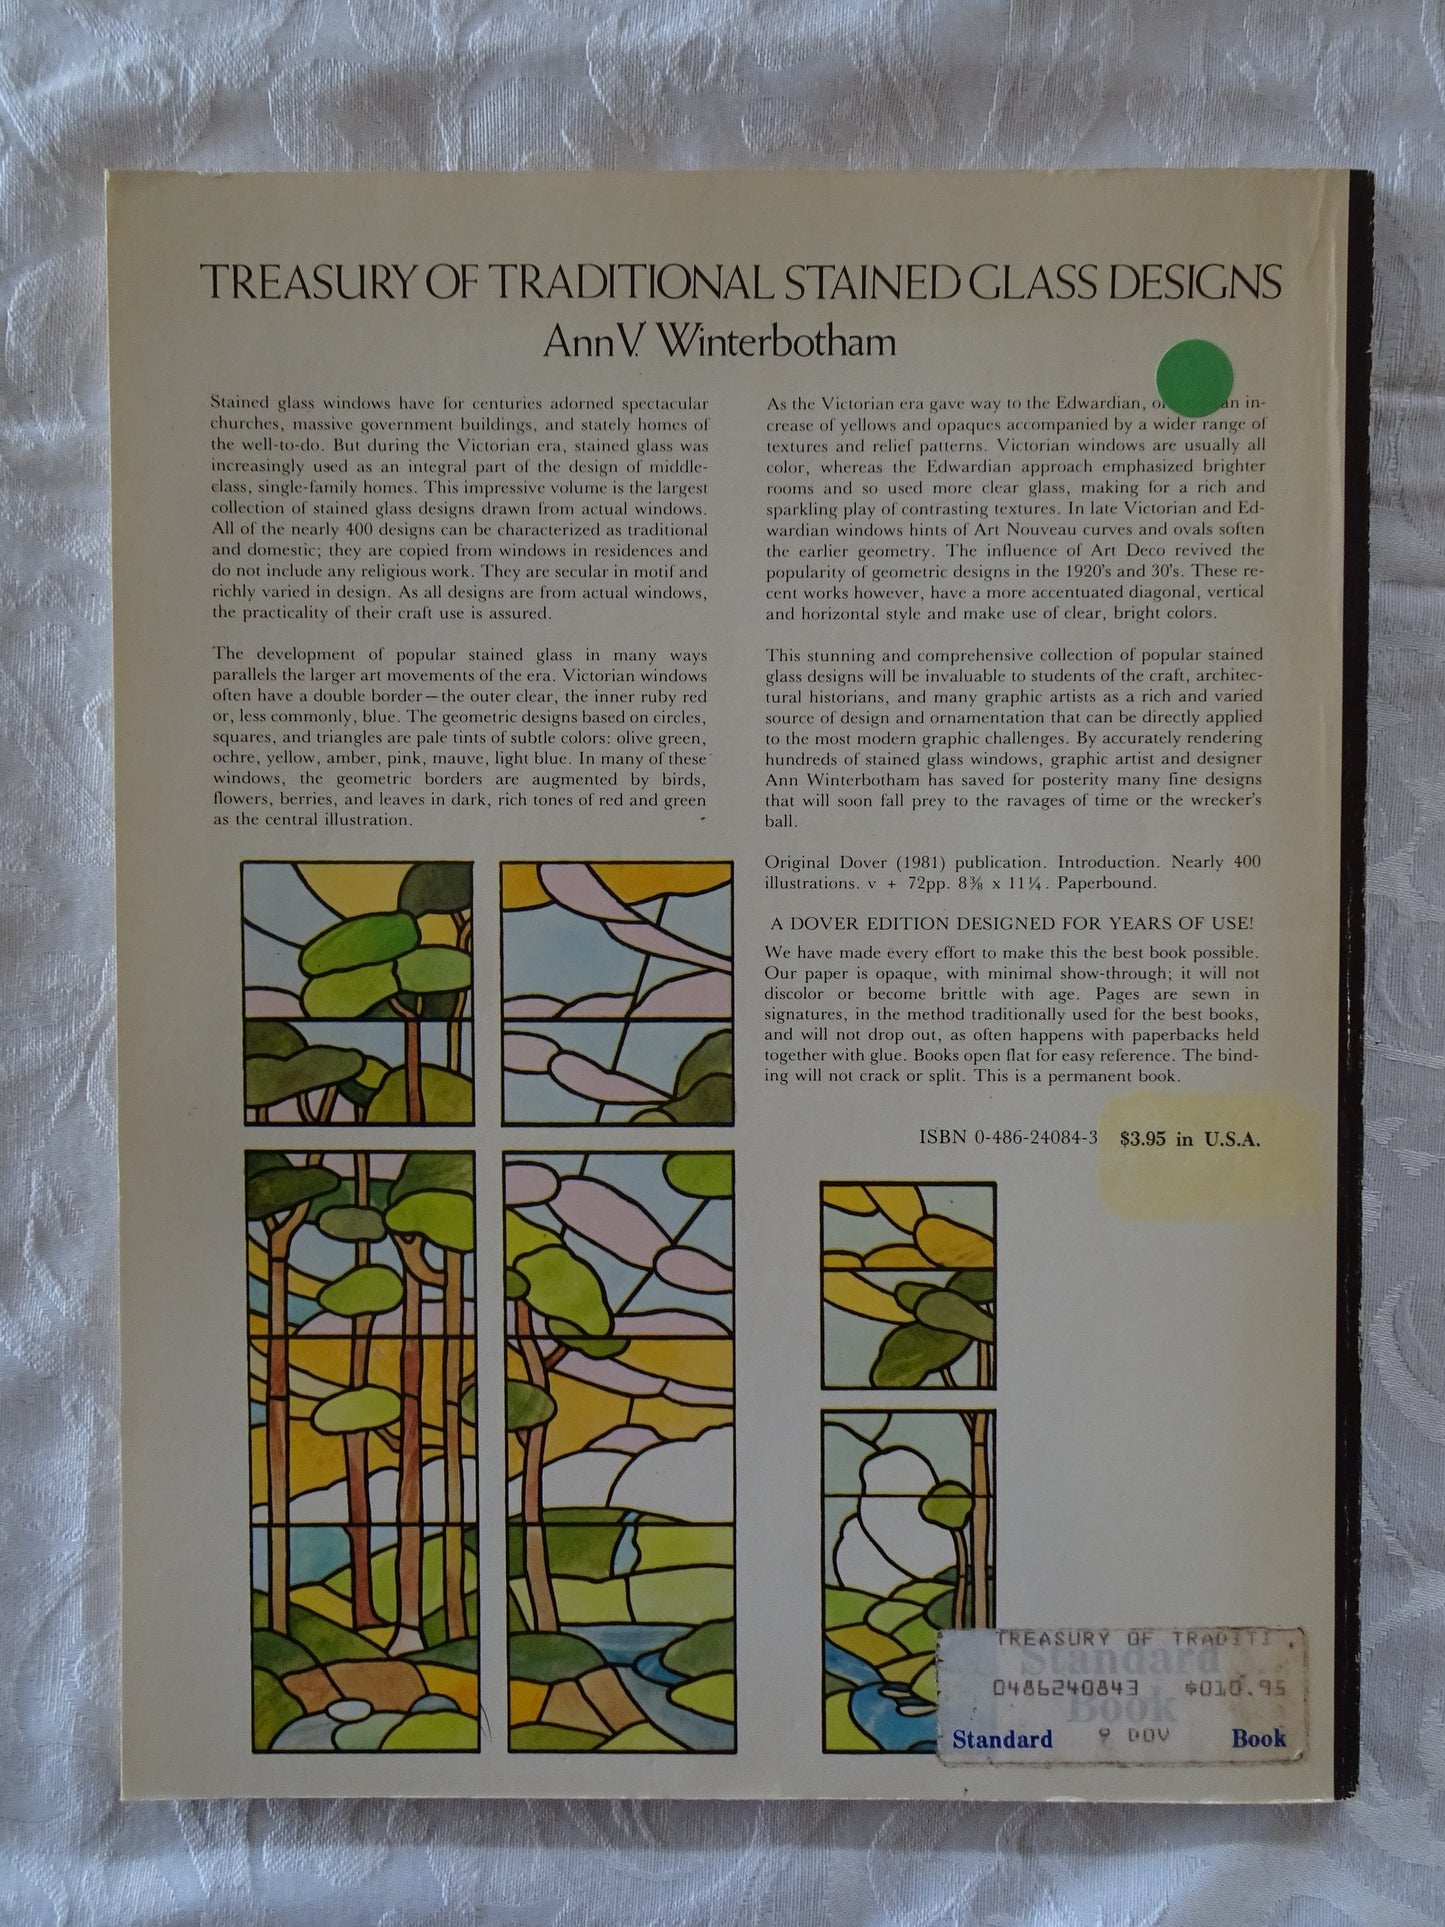 Treasury of Traditional Stained Glass Designs by Ann V. Winterbotham